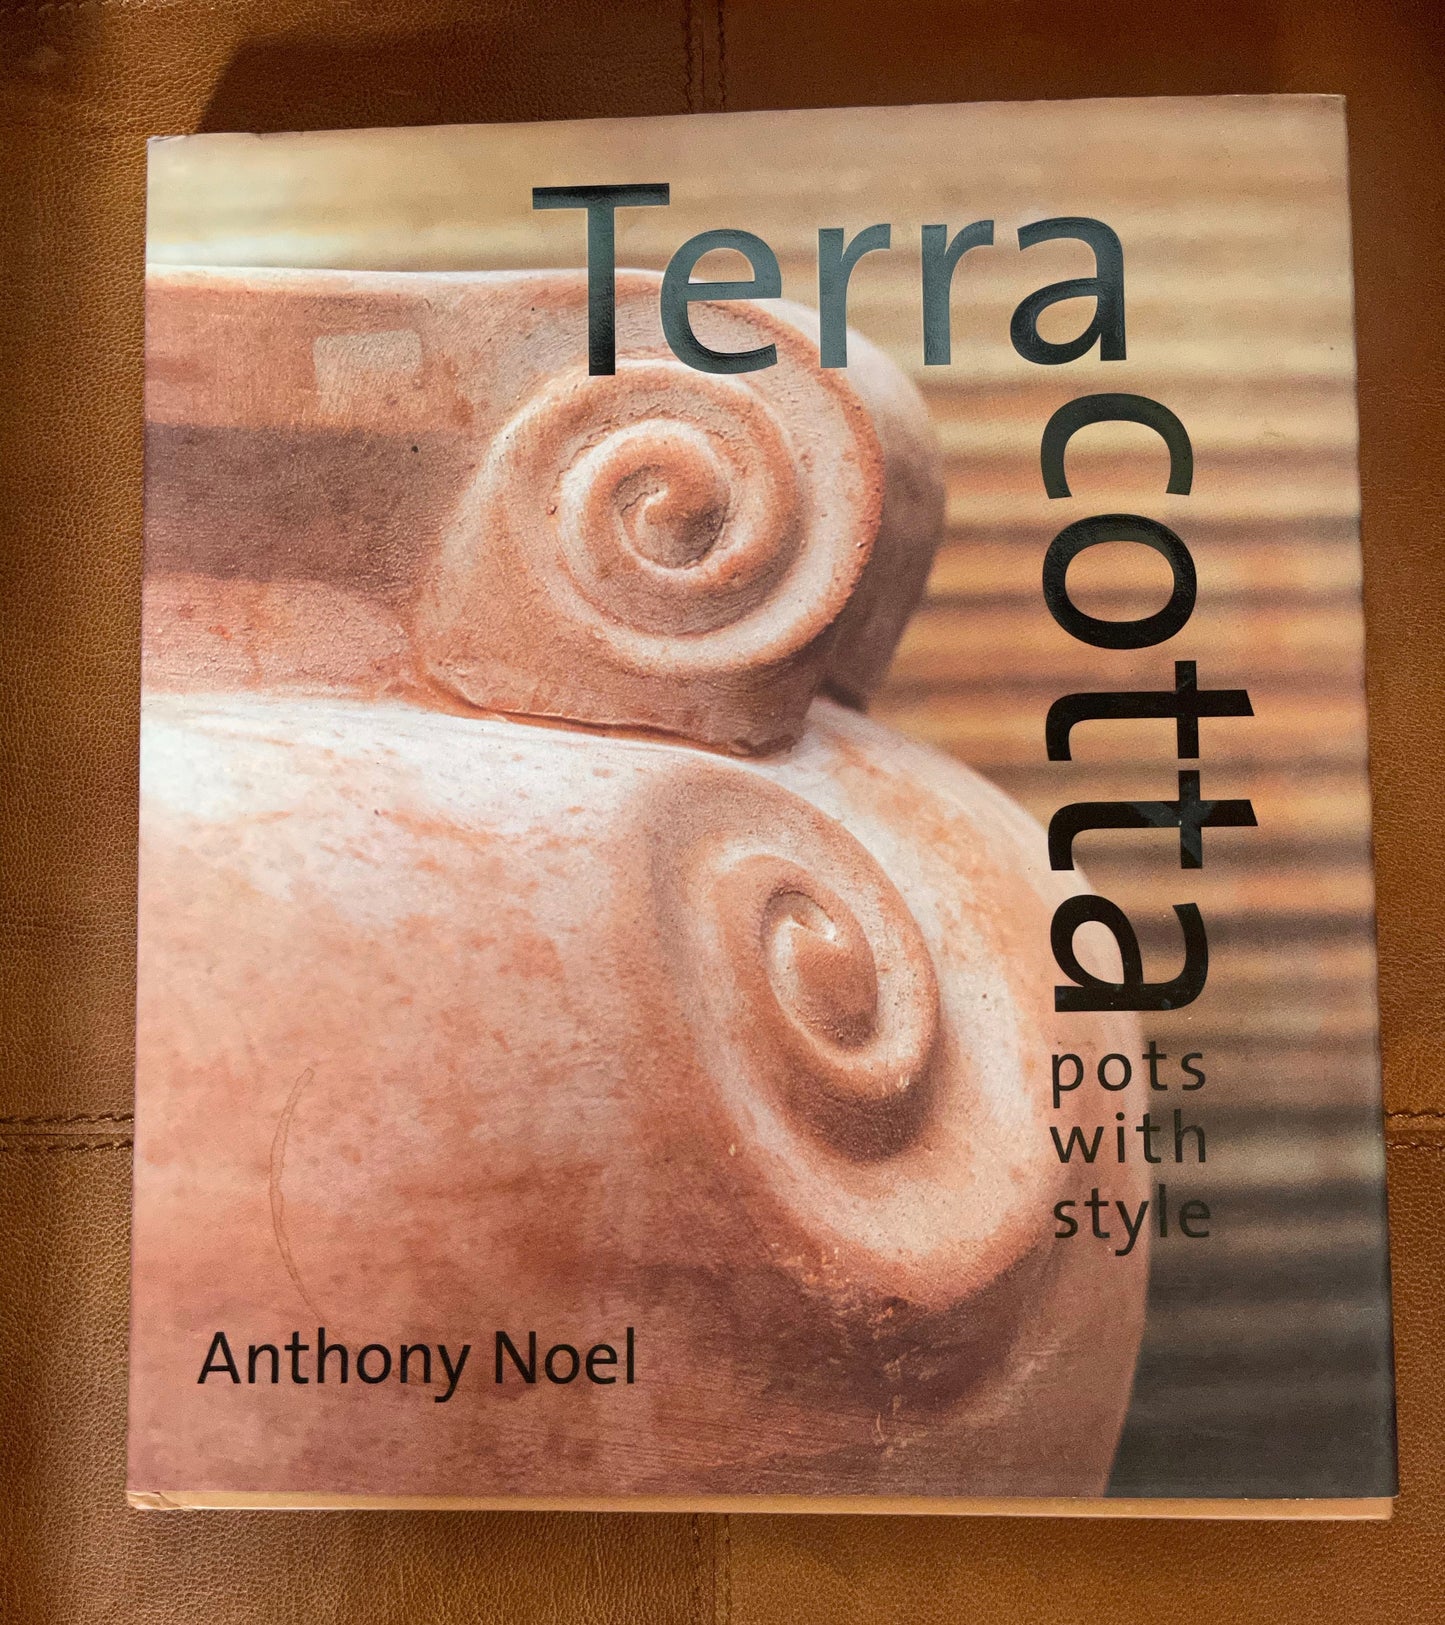 Terra Cotta Book, Pots with Style Decorator Book, Bodhi Books and Magazines